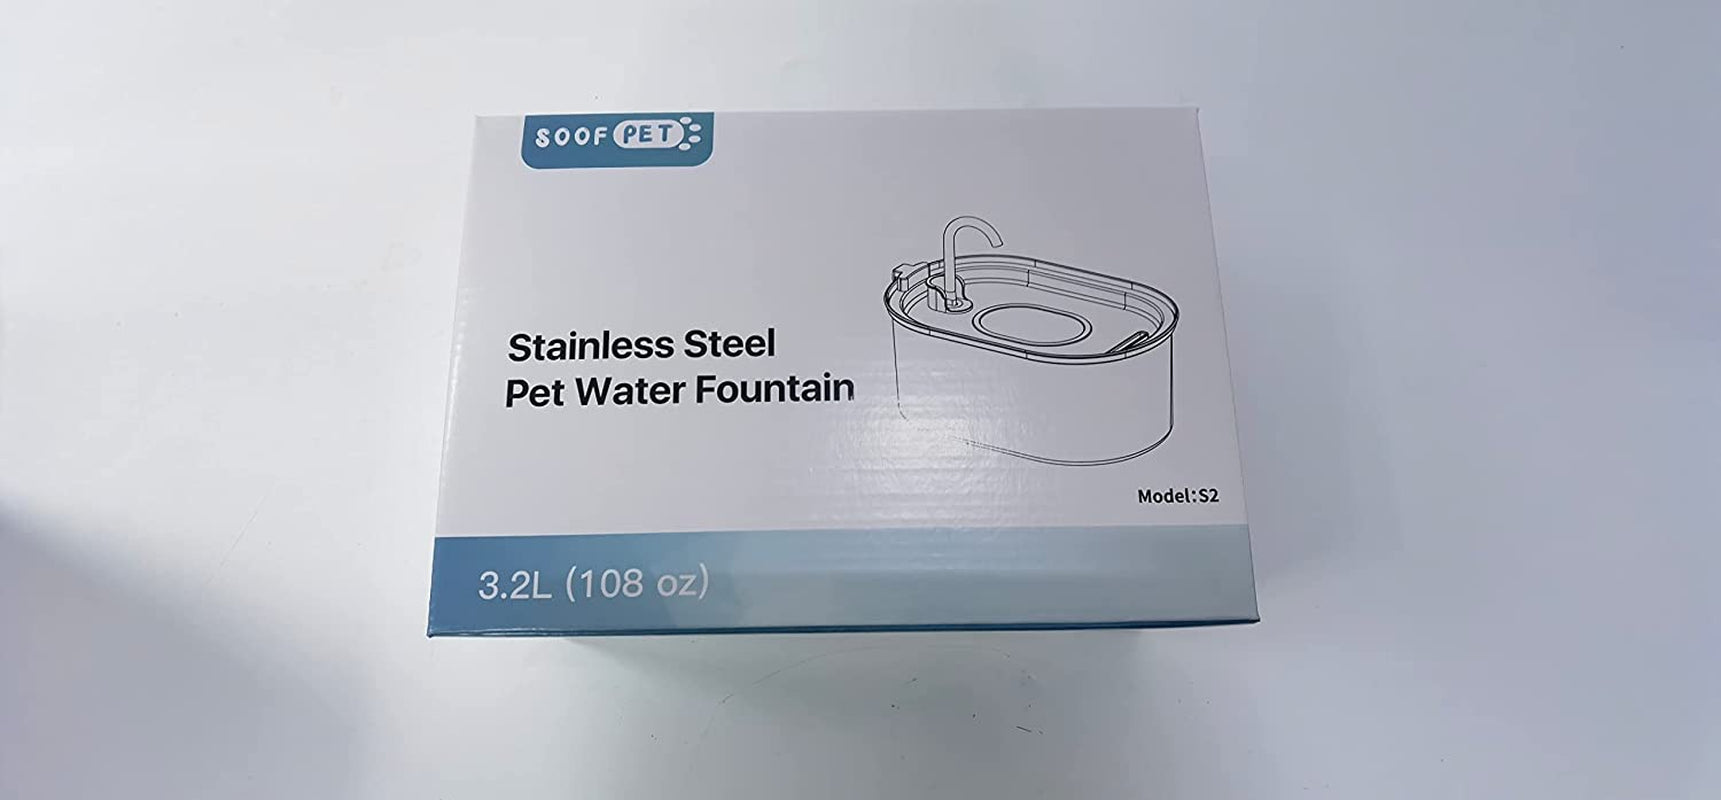 Cat Water Fountain Stainless Steel: 108Oz/3,2L Pet Water Fountain - Water Fountain for Cats inside with Quiet Pump - Dishwasher Safe Cat Fountains - Suitable for a Variety of Pets -